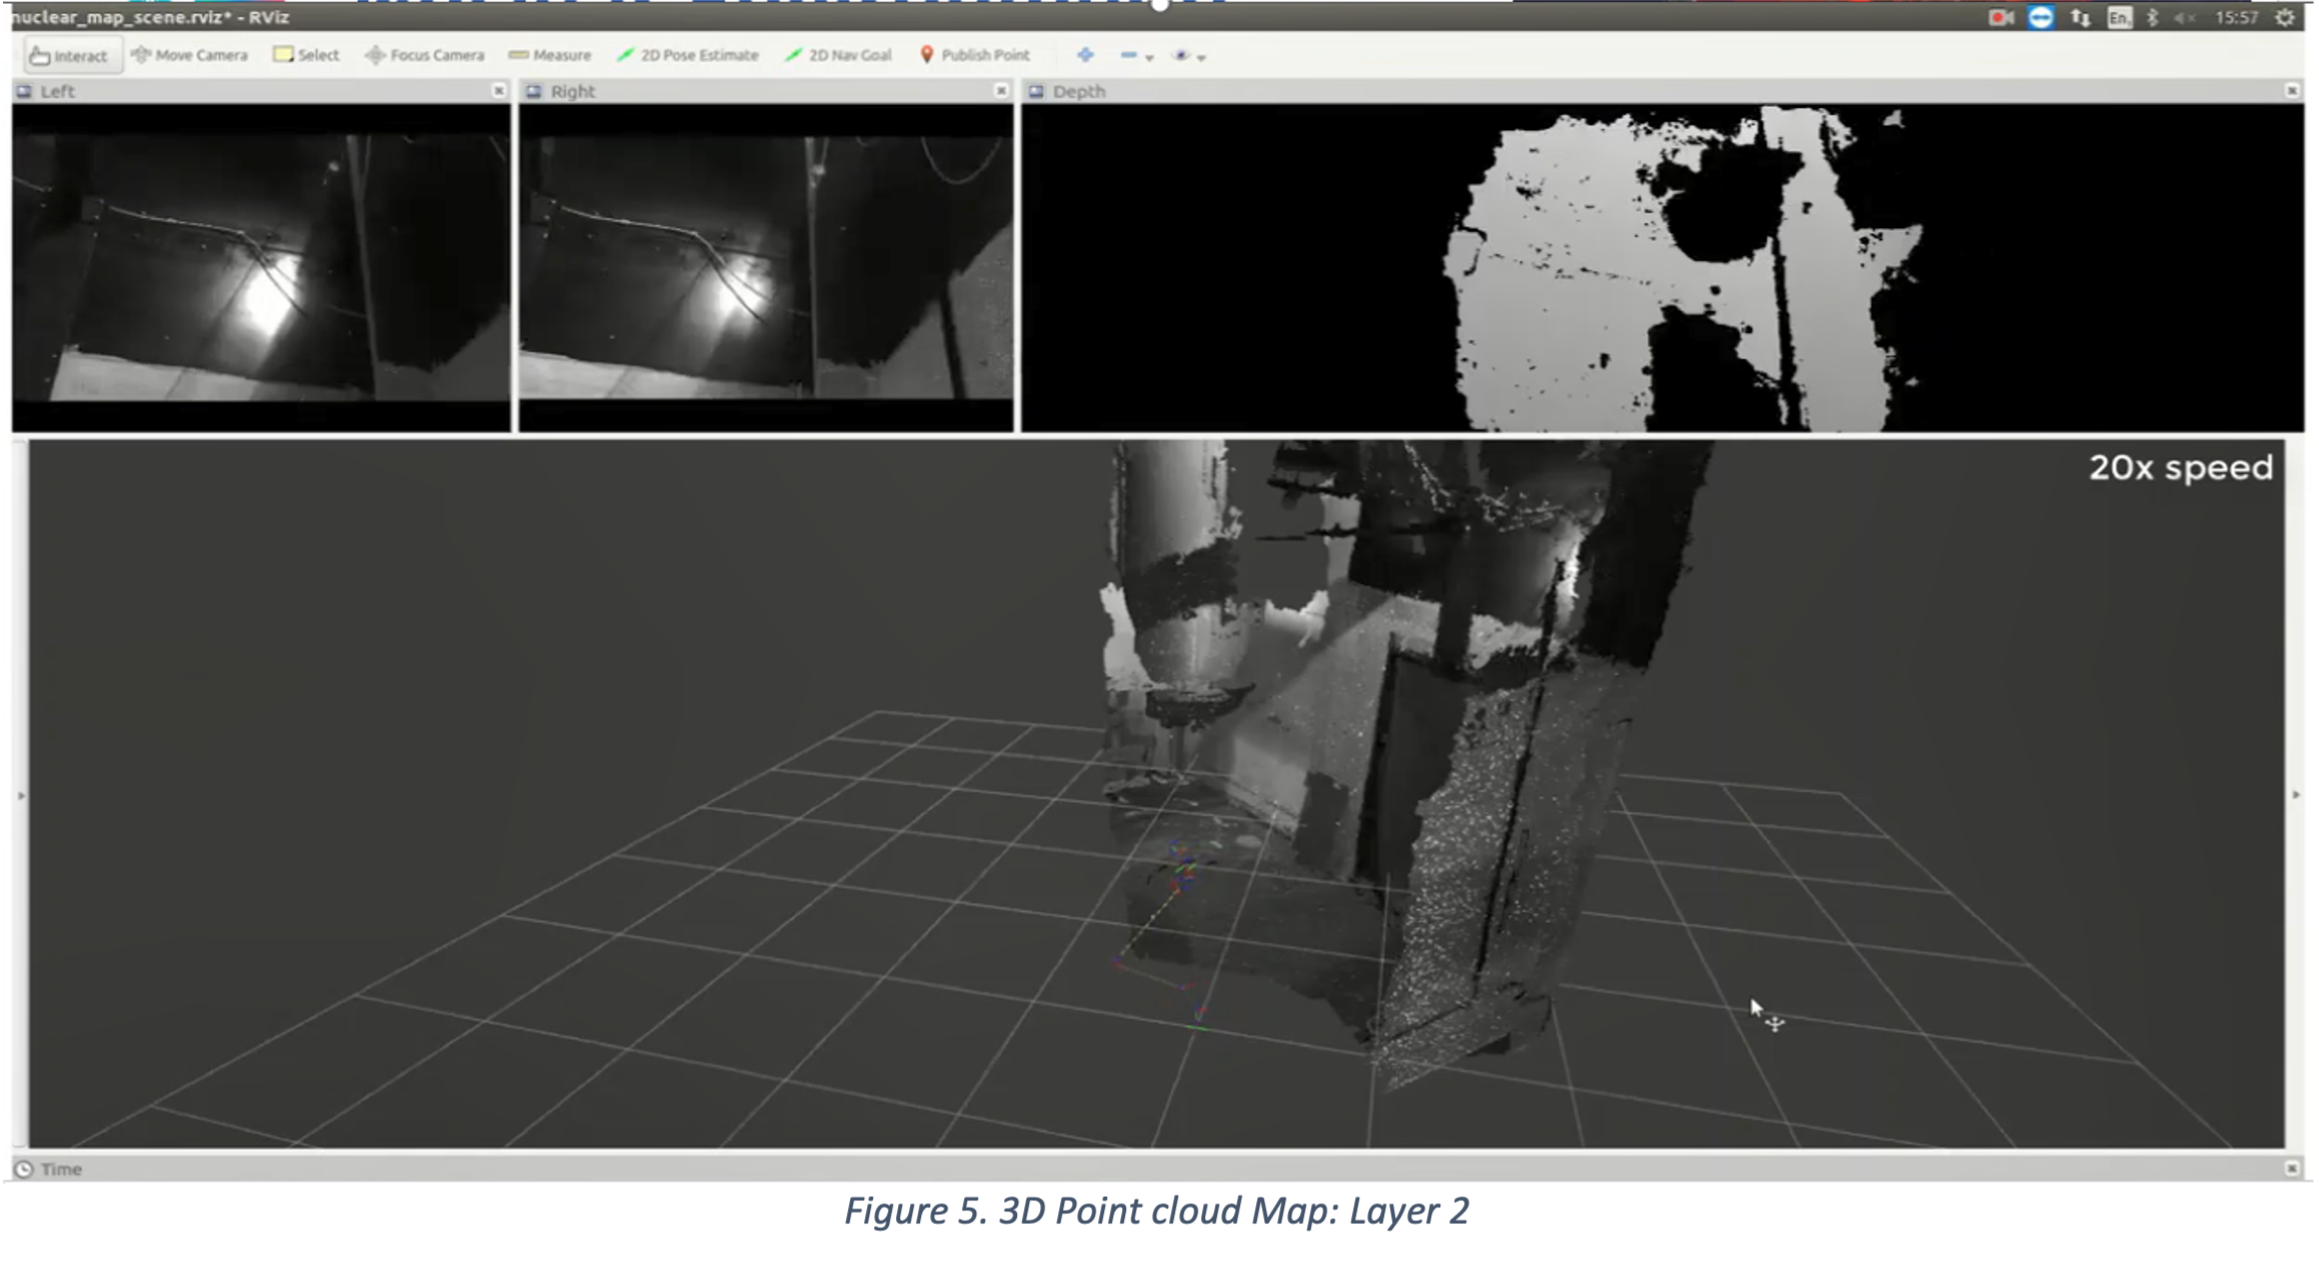 Point cloud map, layer 2